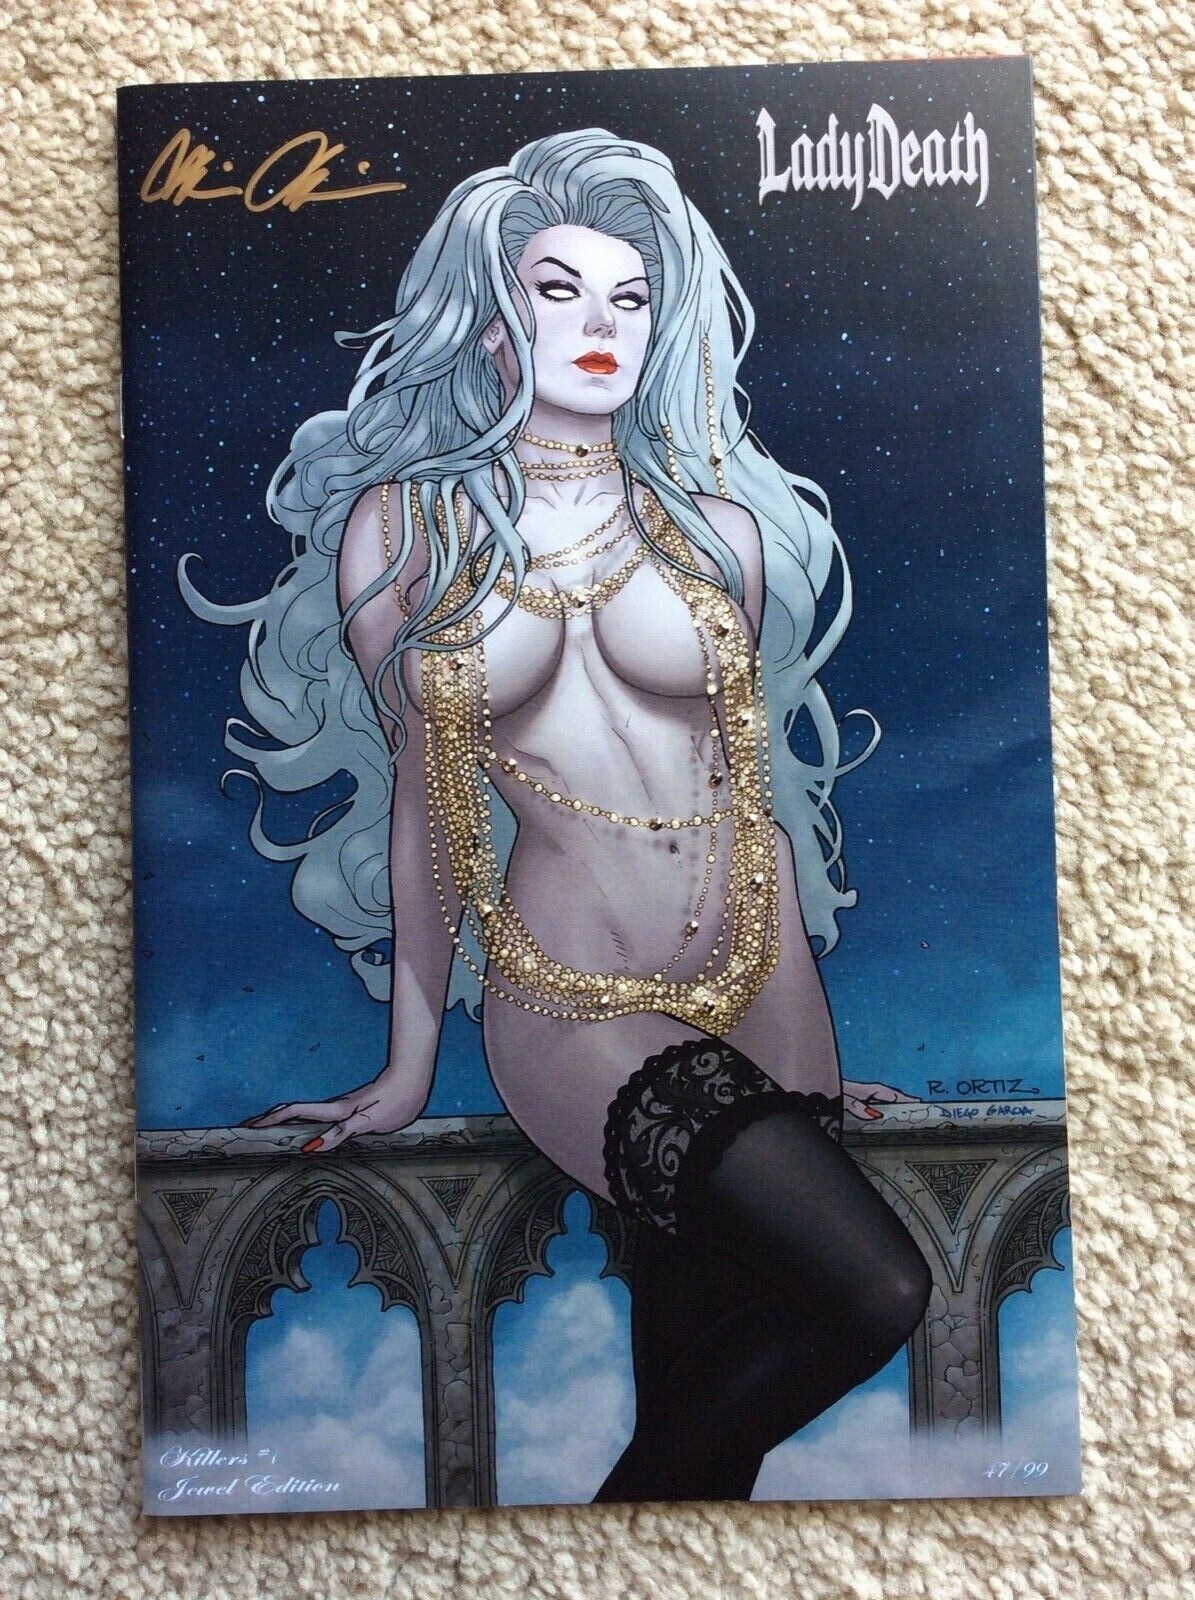 LADY DEATH KILLERS #1 JEWEL Edition 47 of only 99 copies made - SIGNED